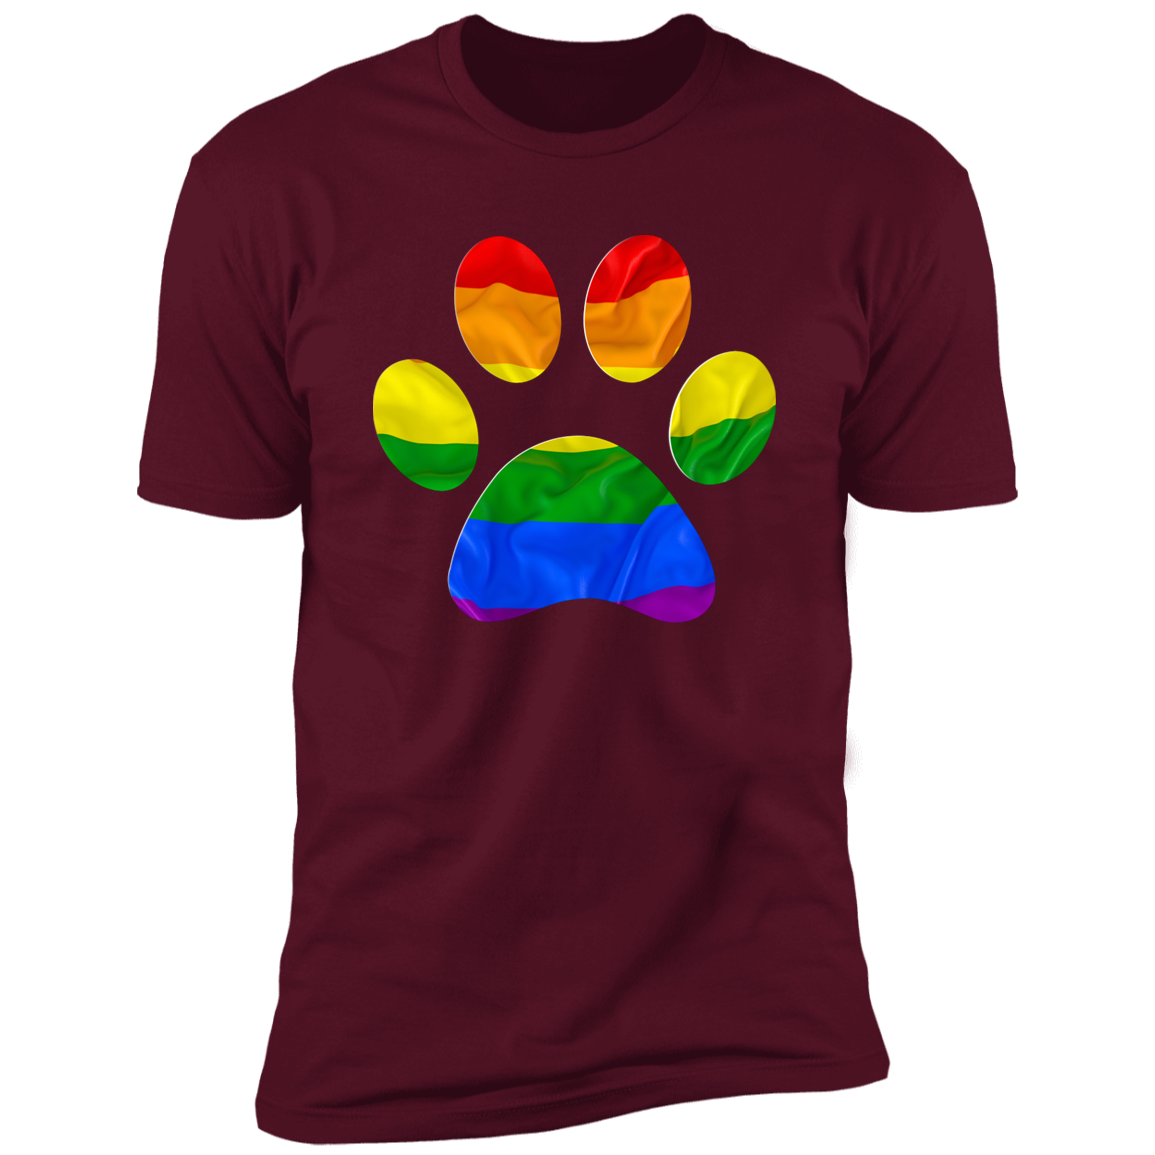 Pride Paw Pride T-shirt, Paw Pride Dog Shirt for humans, in maroon